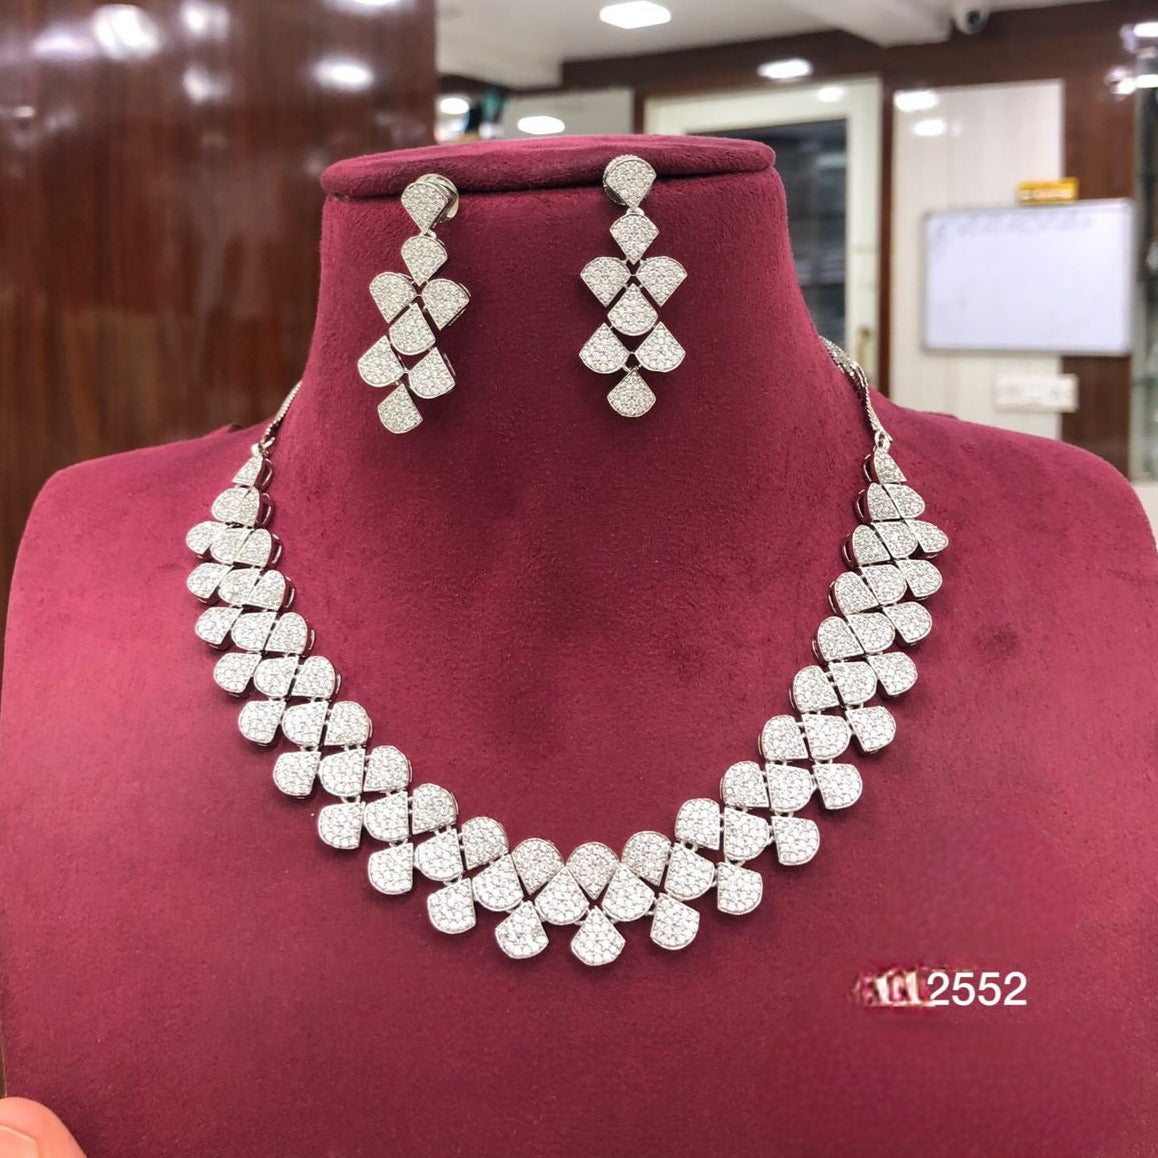 Elegant American Diamond Charming Necklace with Matching Earrings Set